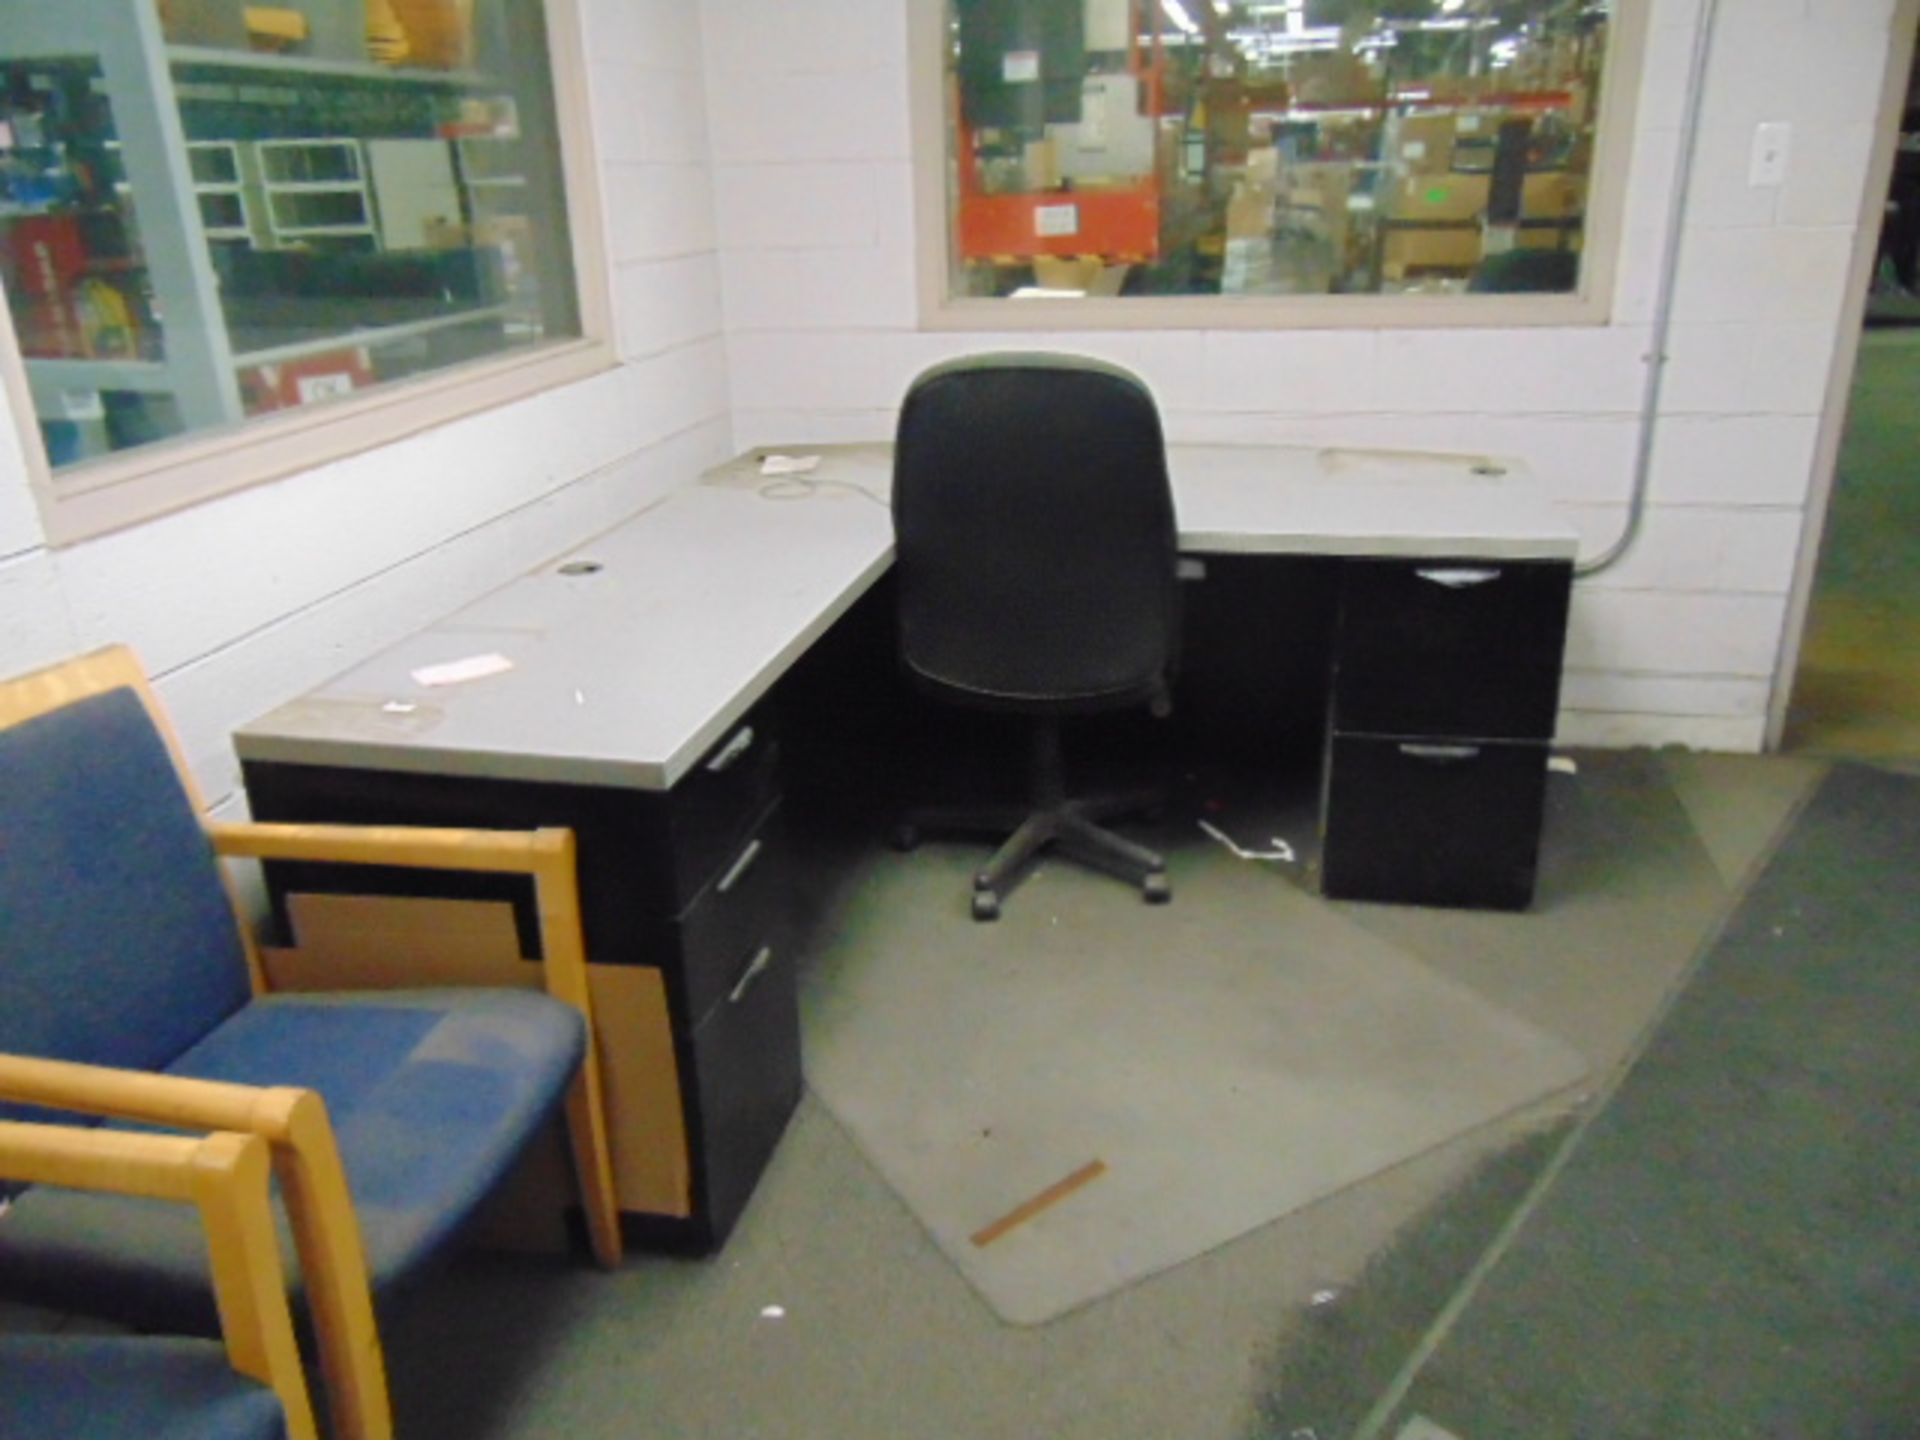 LOT CONSISTING OF: (2) L-shaped desks, file cabinet, mini refrigerator & (4) chairs - Image 2 of 5